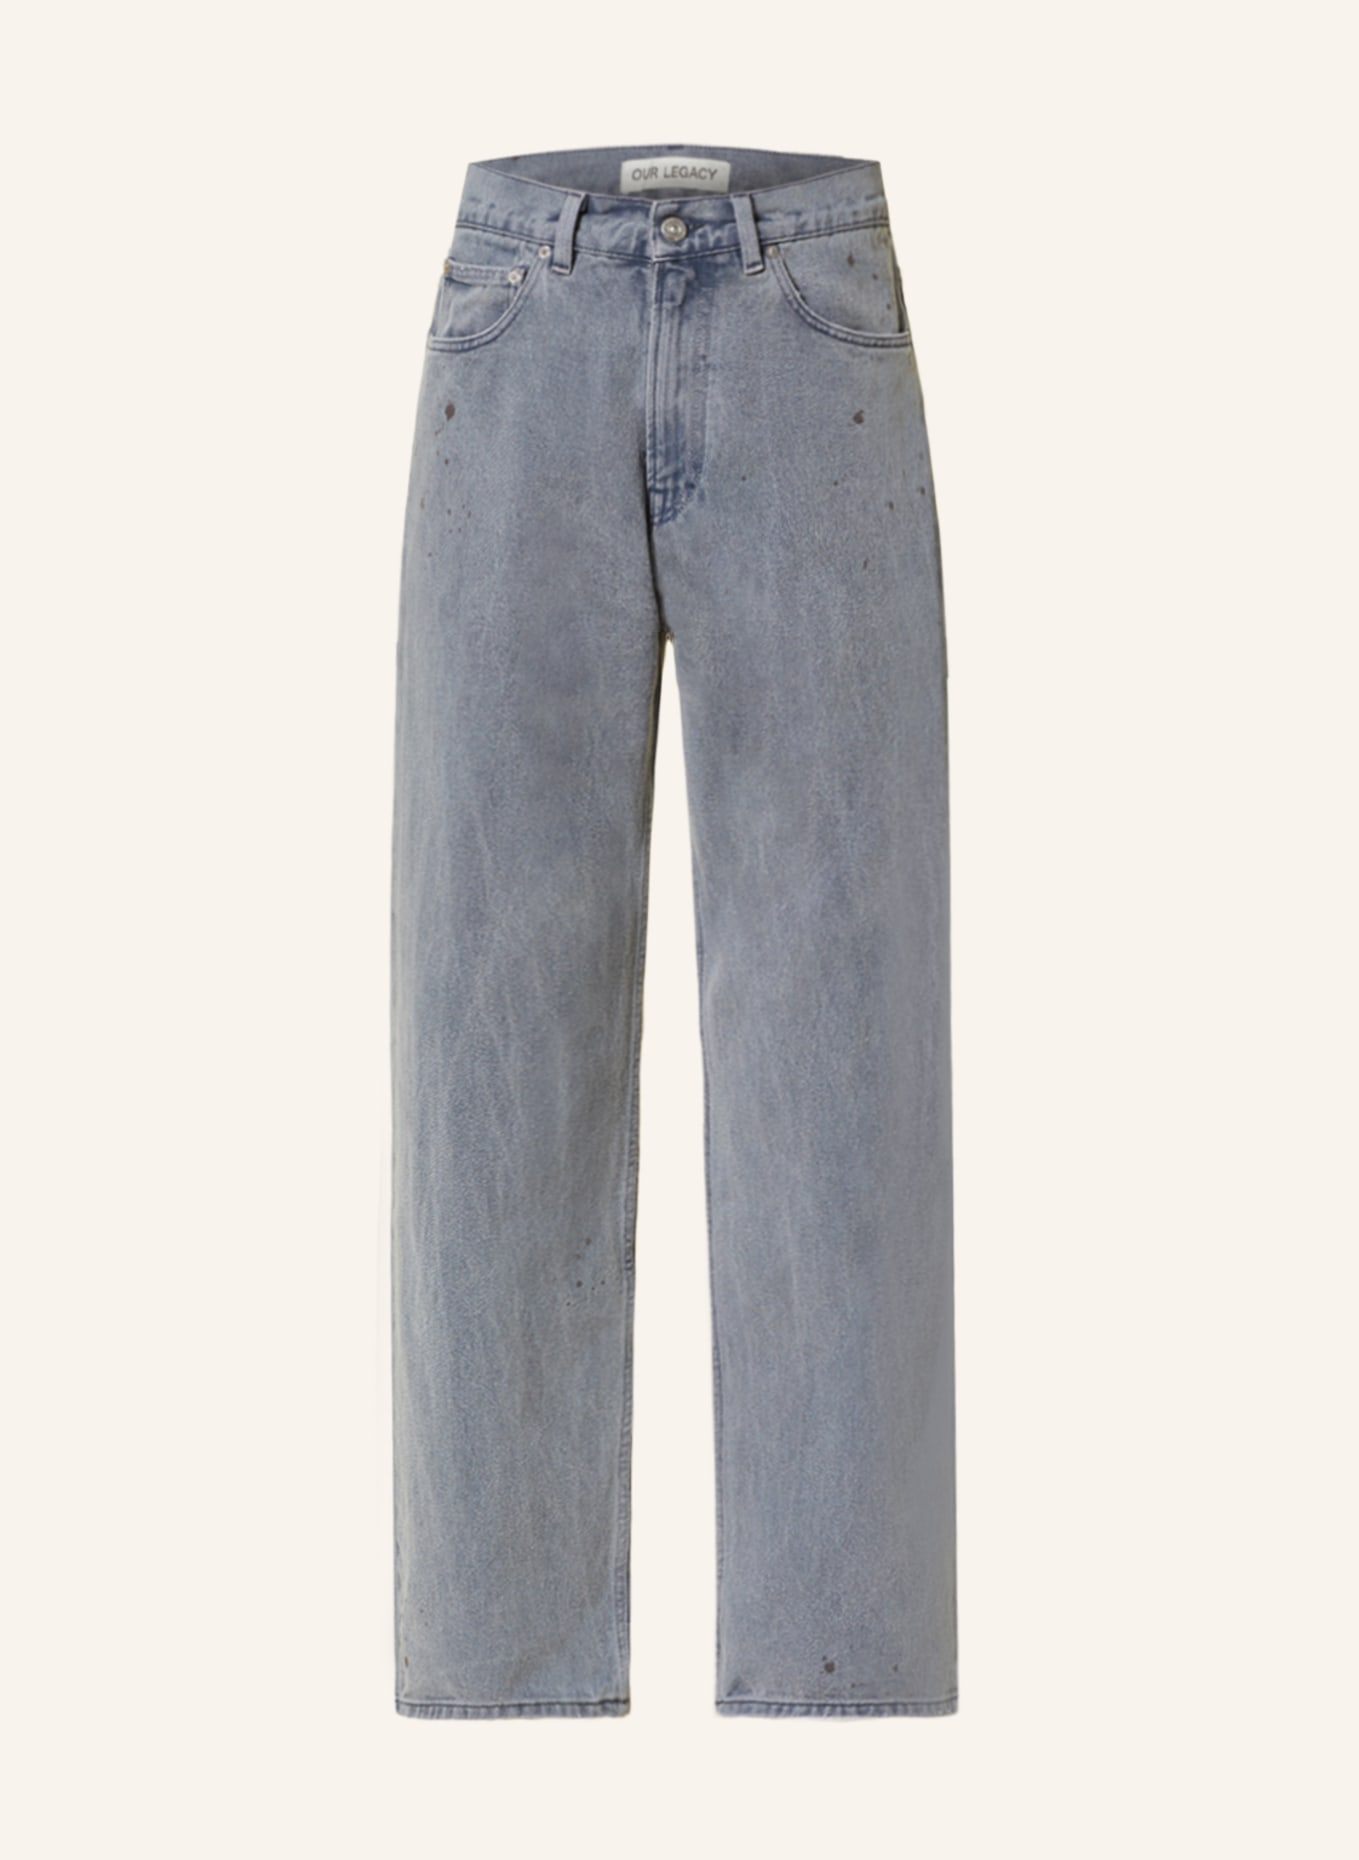 OUR LEGACY Jeans THIRD CUT regular fit in twilight attic wash